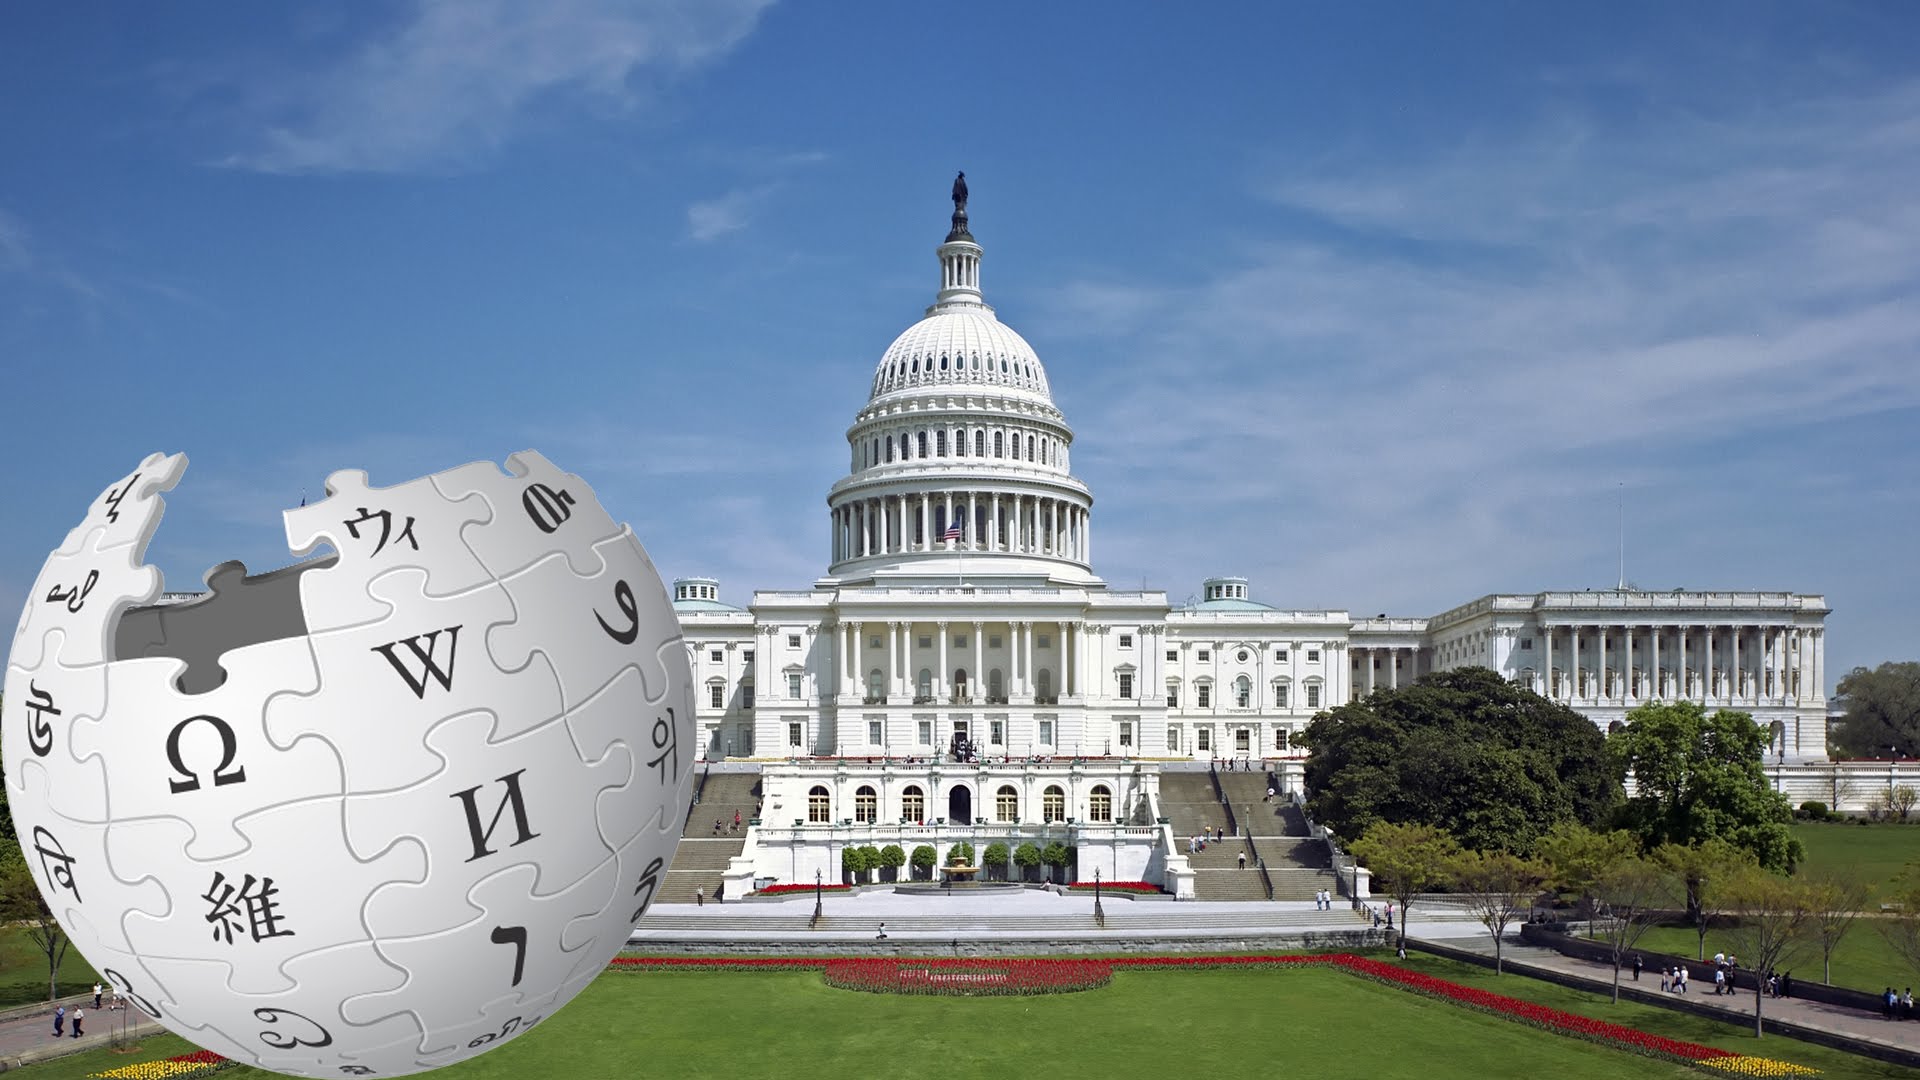 Congress Wikipedia Edits Now Tracked By Twitter Bot